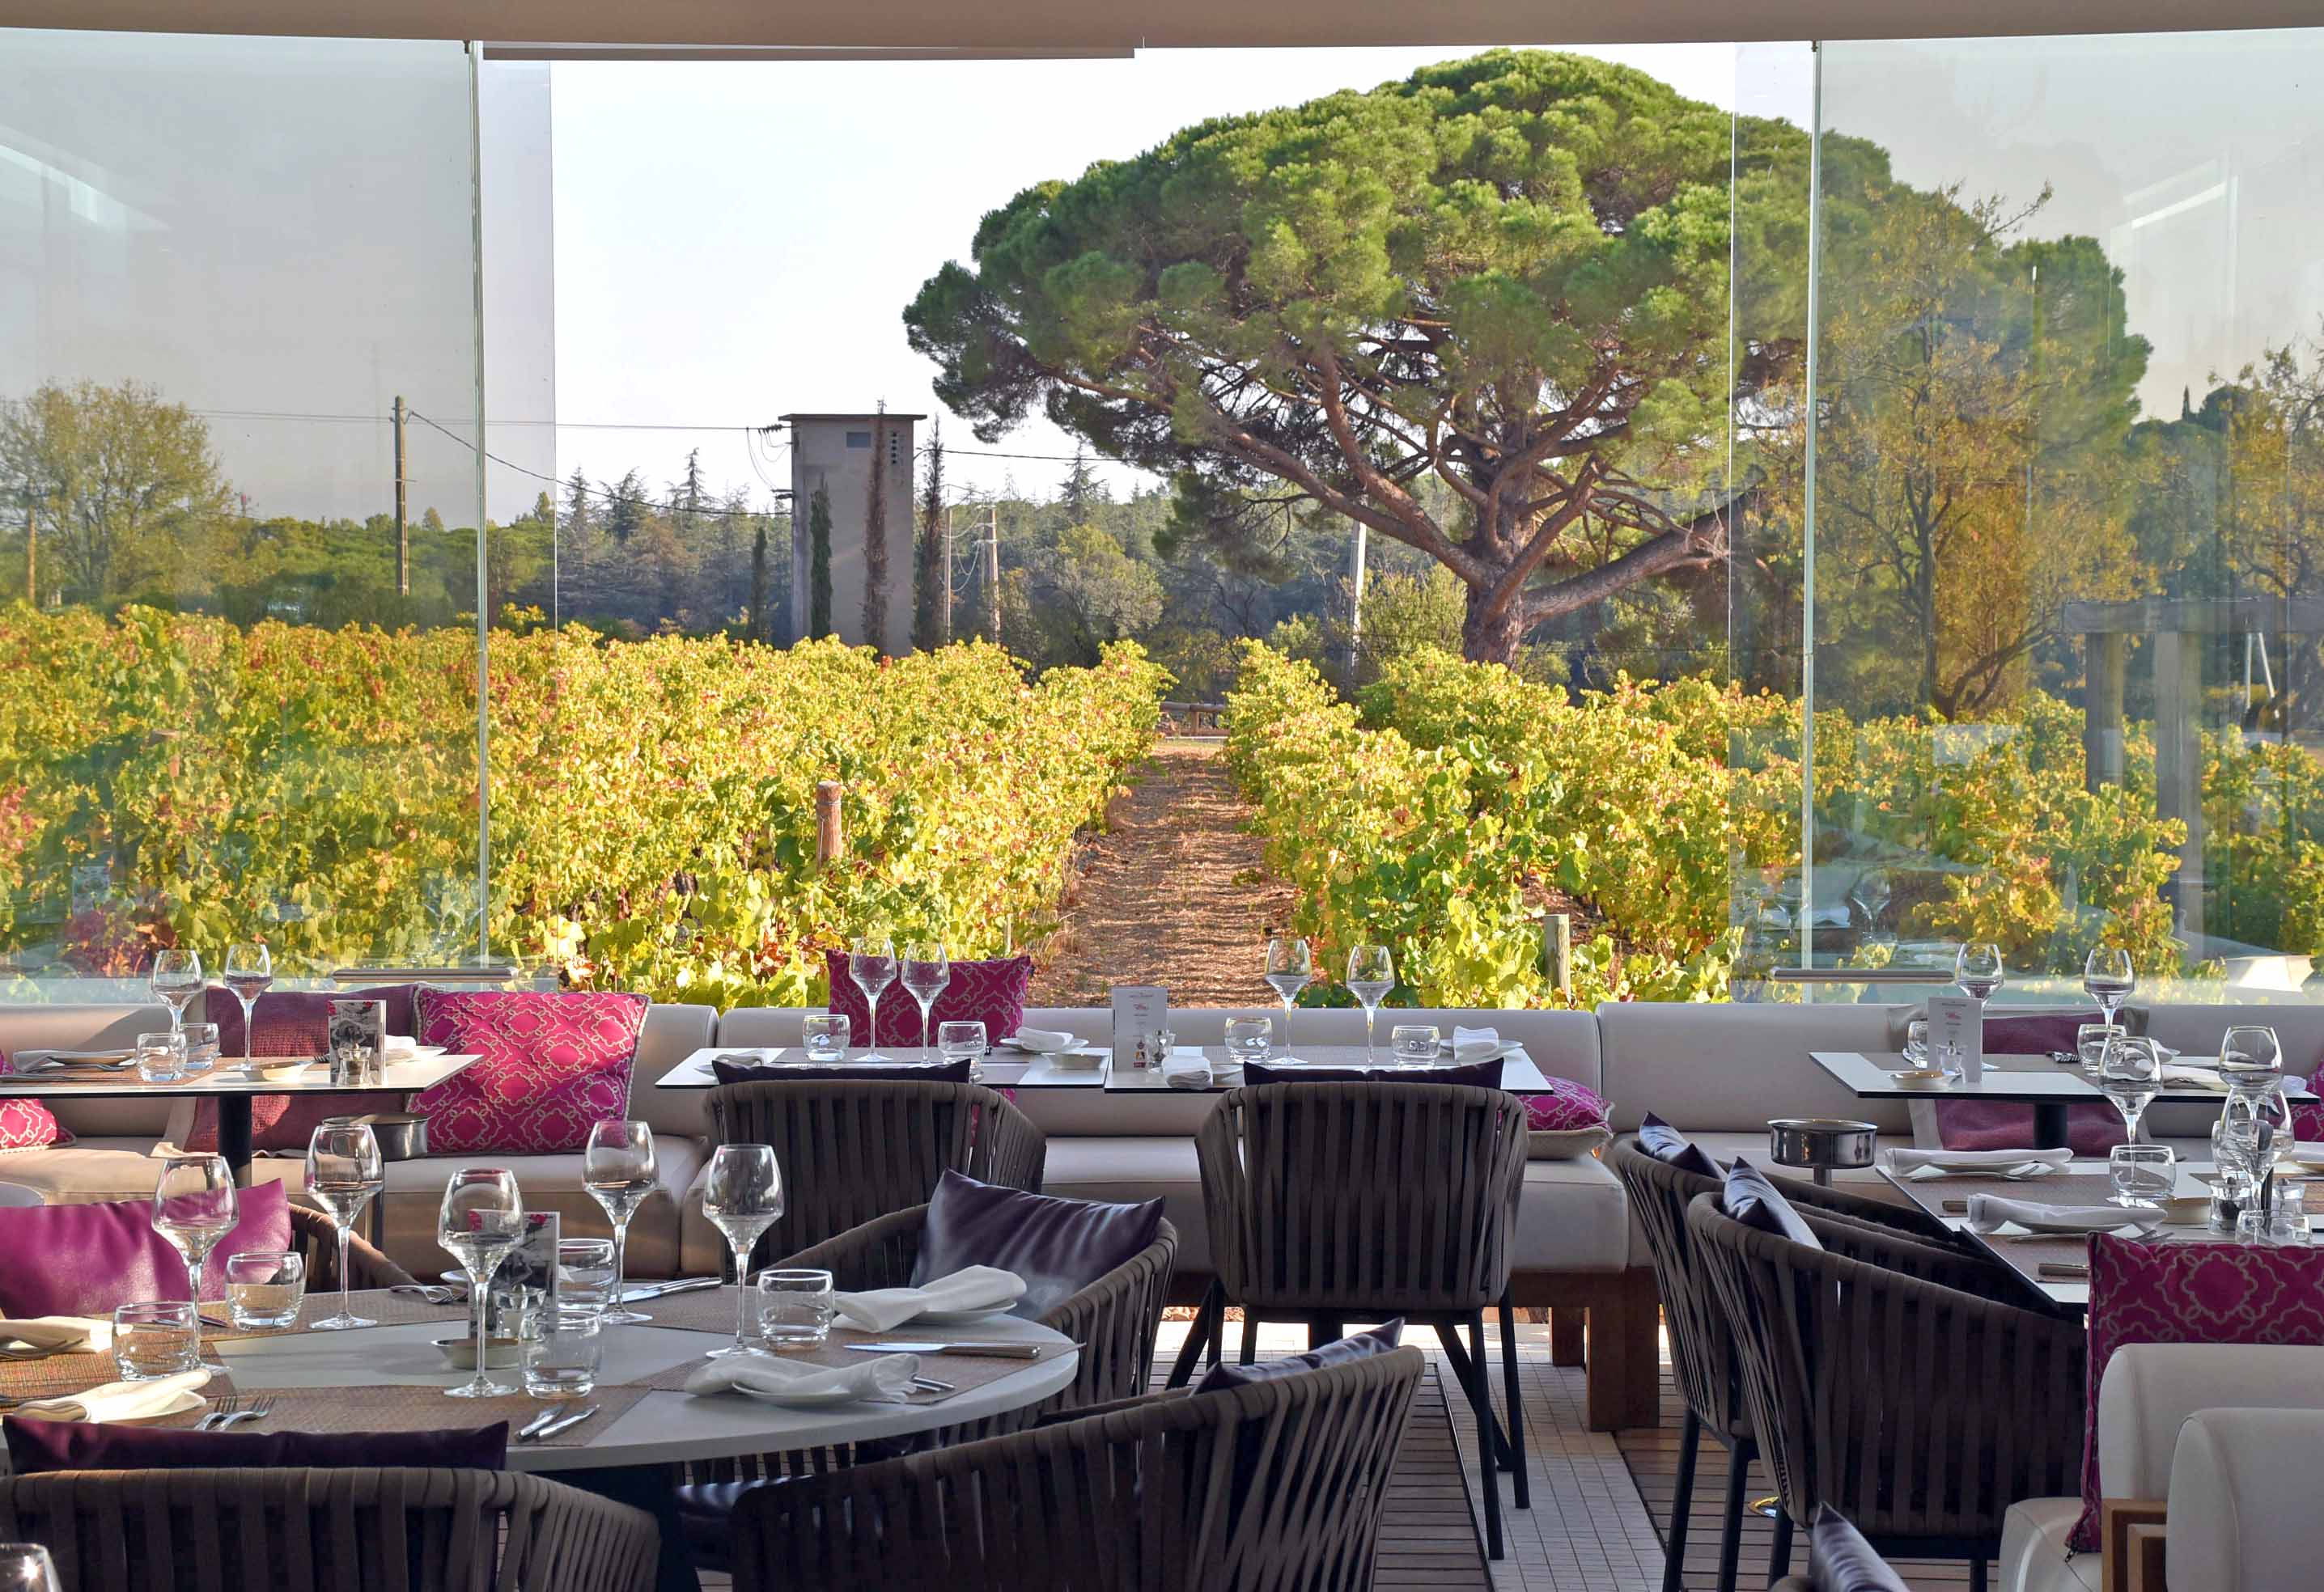 La Plage by Verchant Restaurant Review: An Idylic Vineyard Setting in the Montpellier Countryside